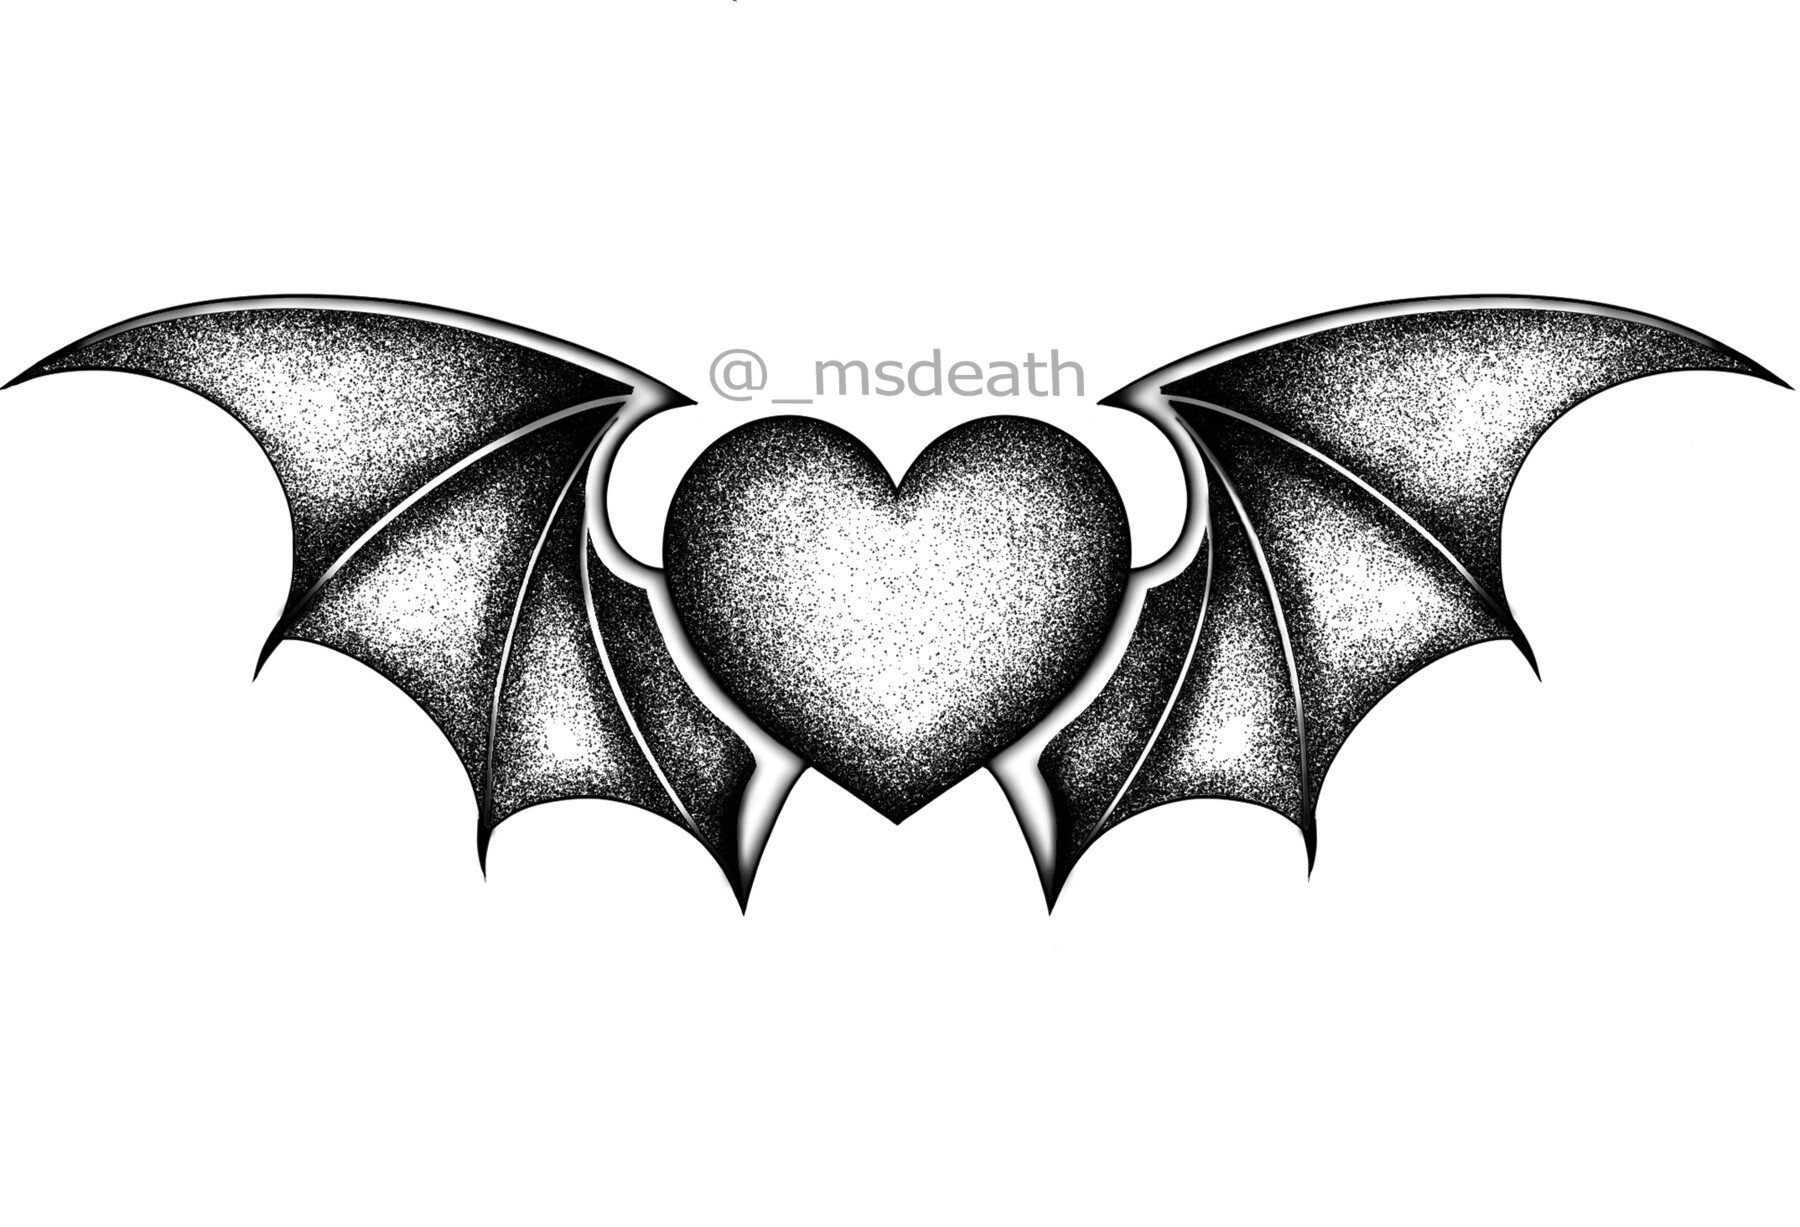 heart with bat wings tattoo